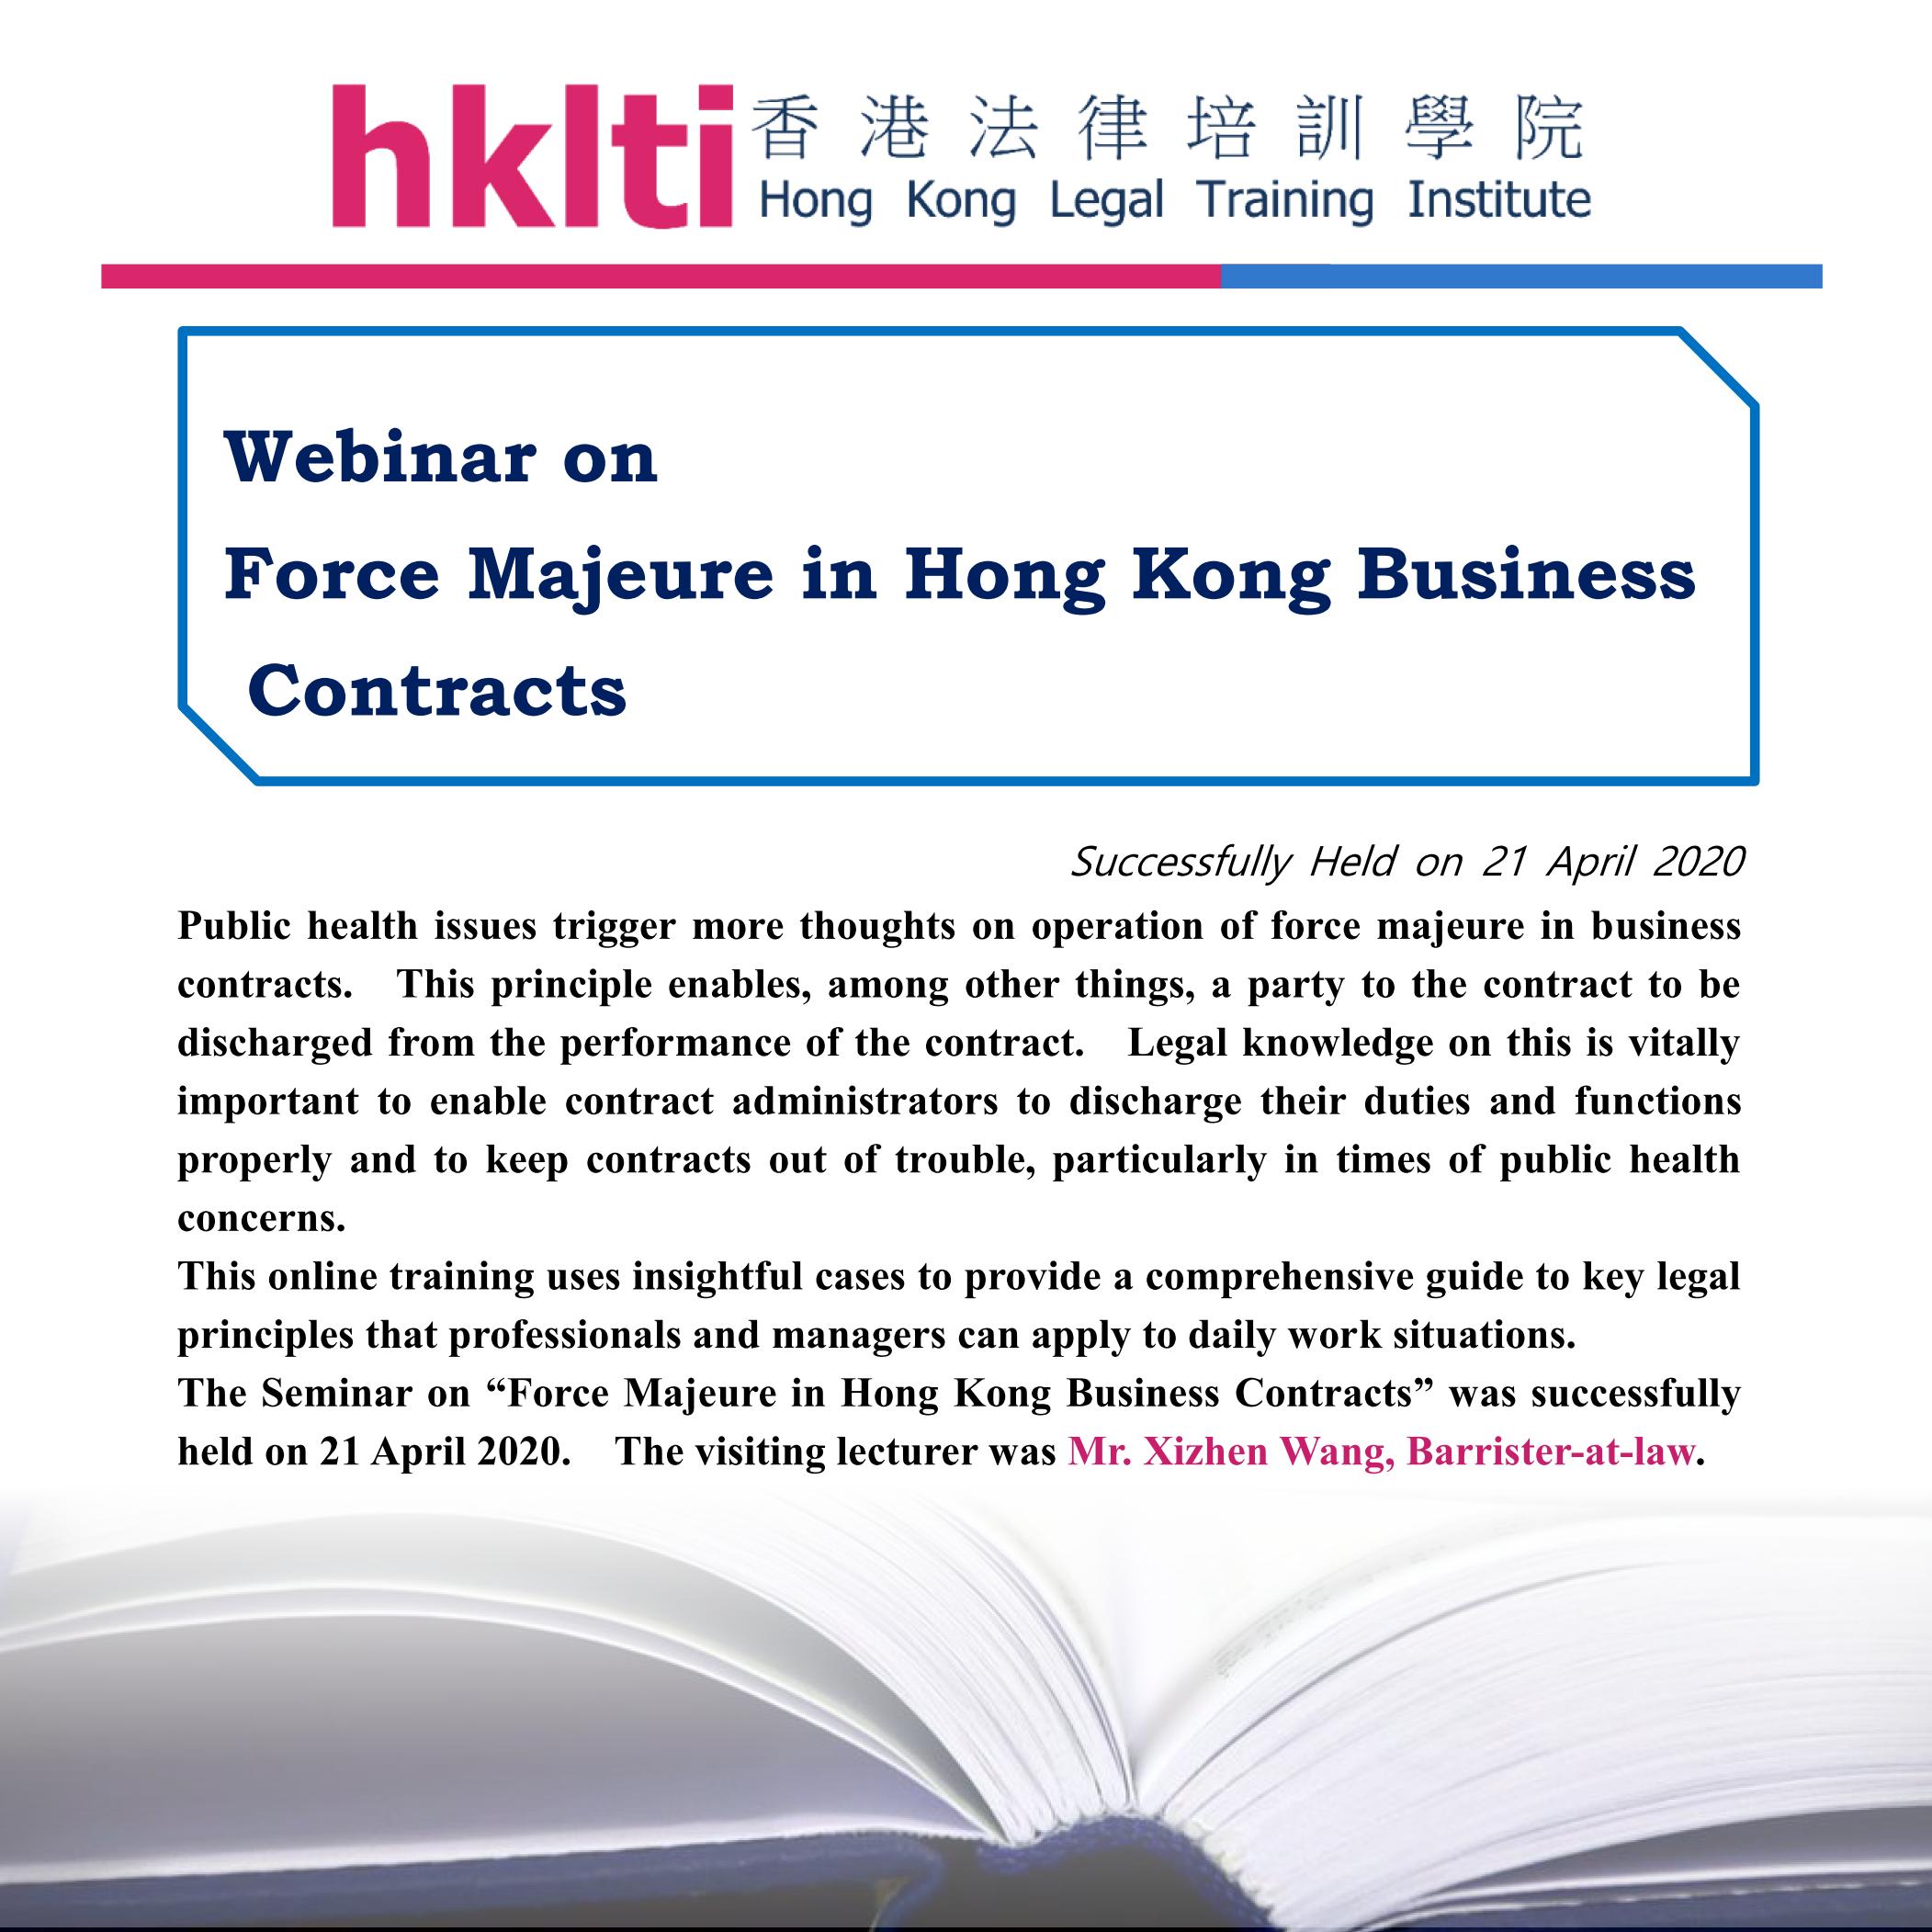 hklti webinar force majeure in hk business contracts seminar report 202004